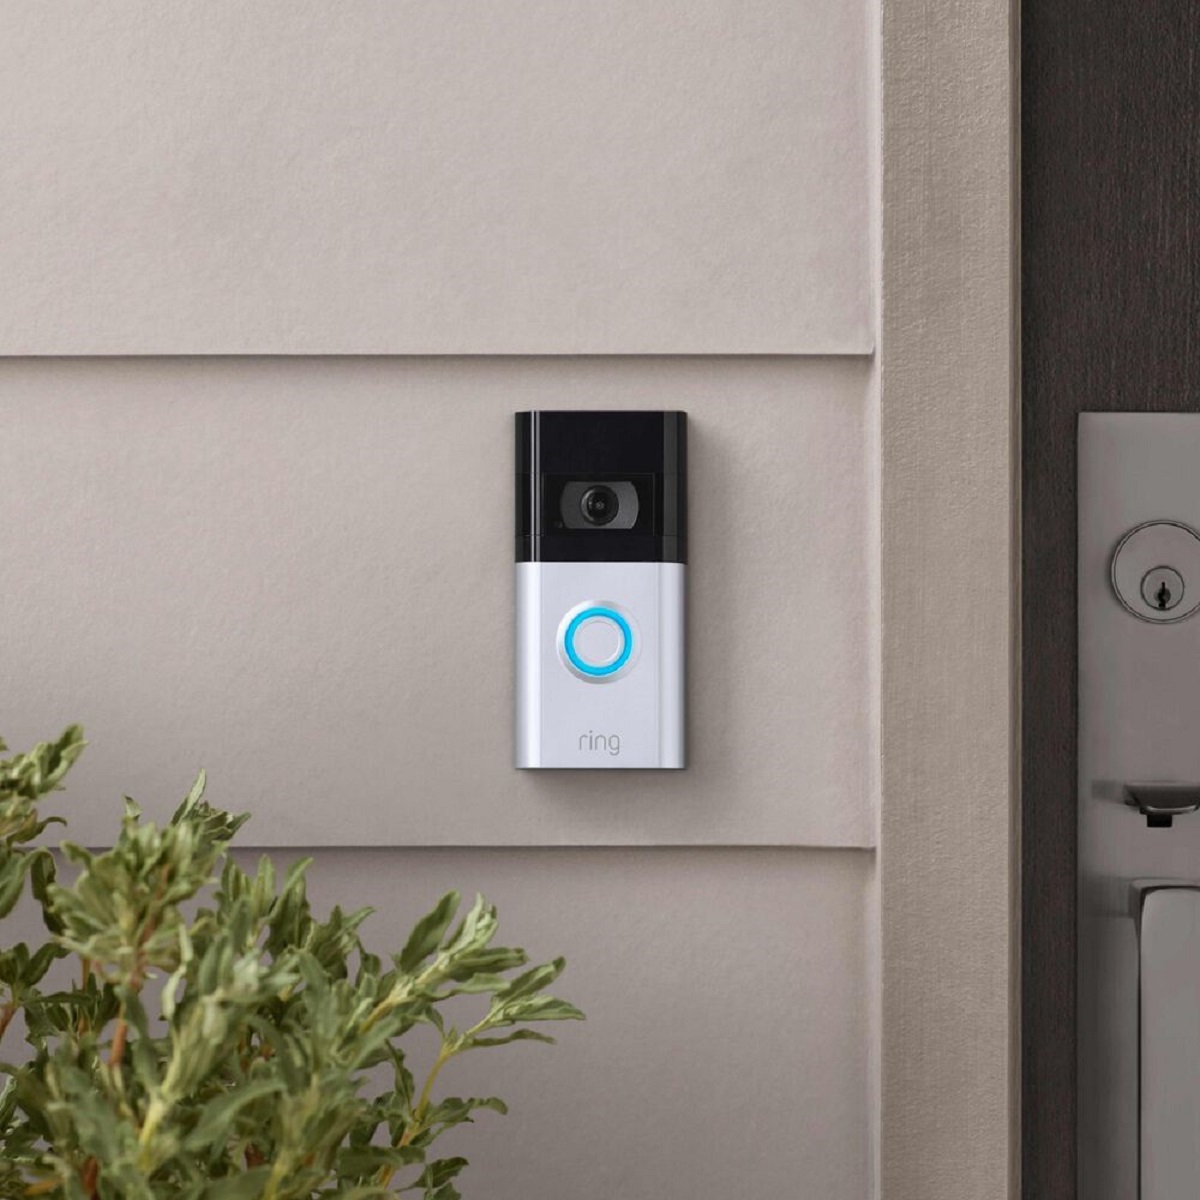 11 Amazing Ring Wi-Fi Enabled Video Doorbell In Satin Nickel for 2023